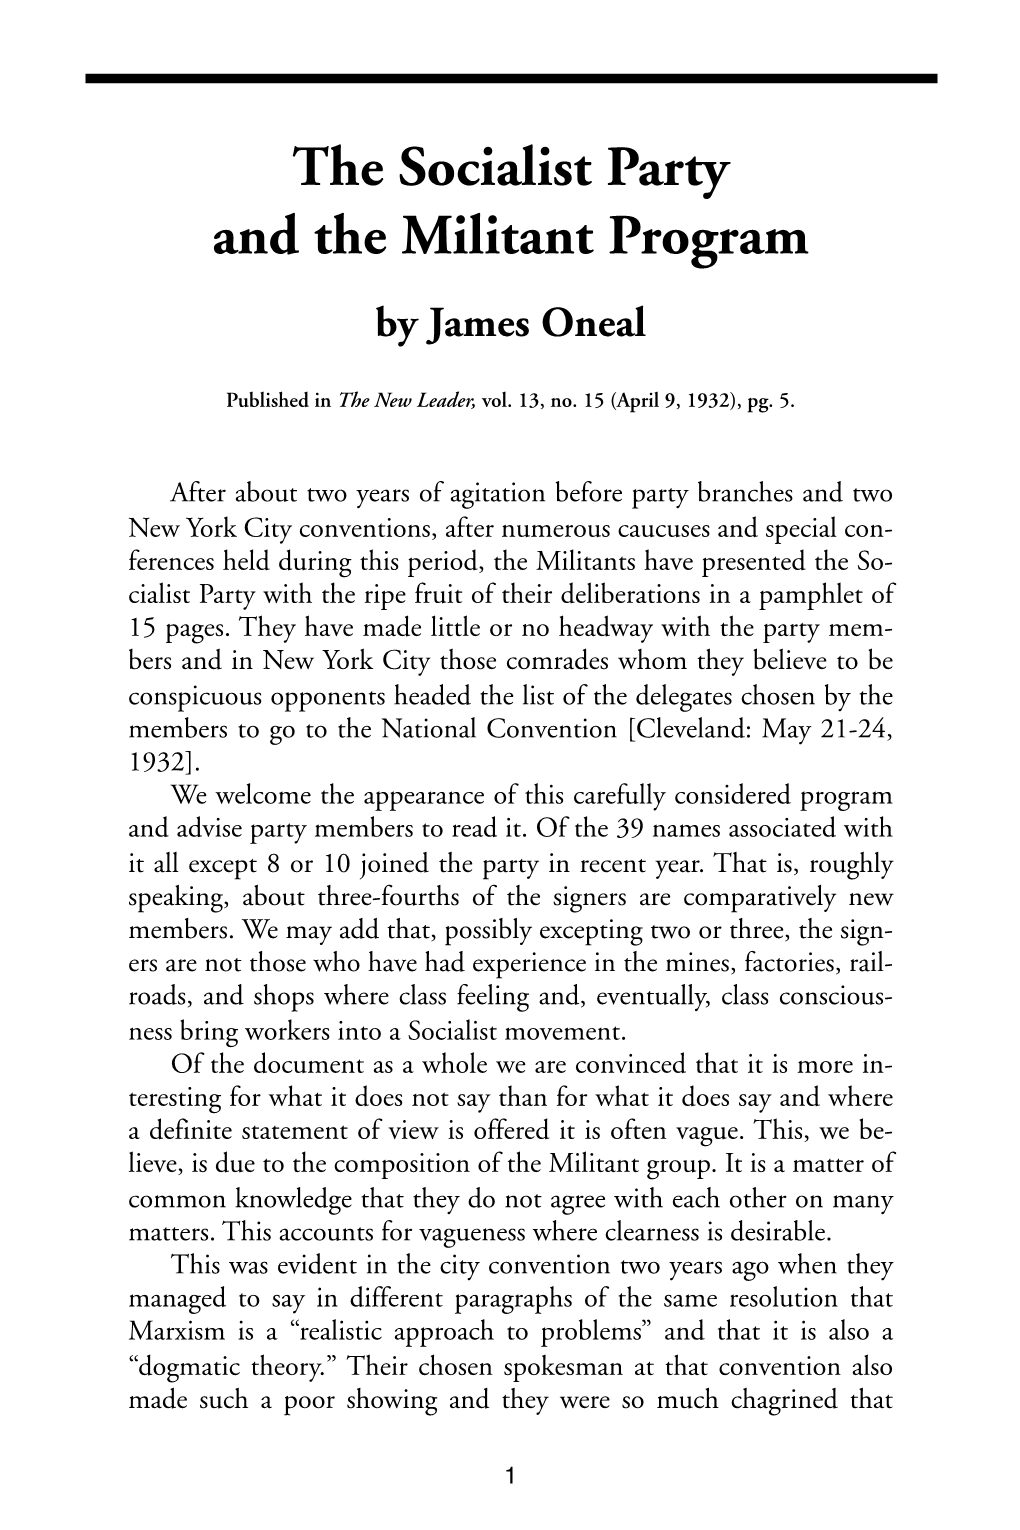 "The Socialist Party and the Militant Program," by James Oneal